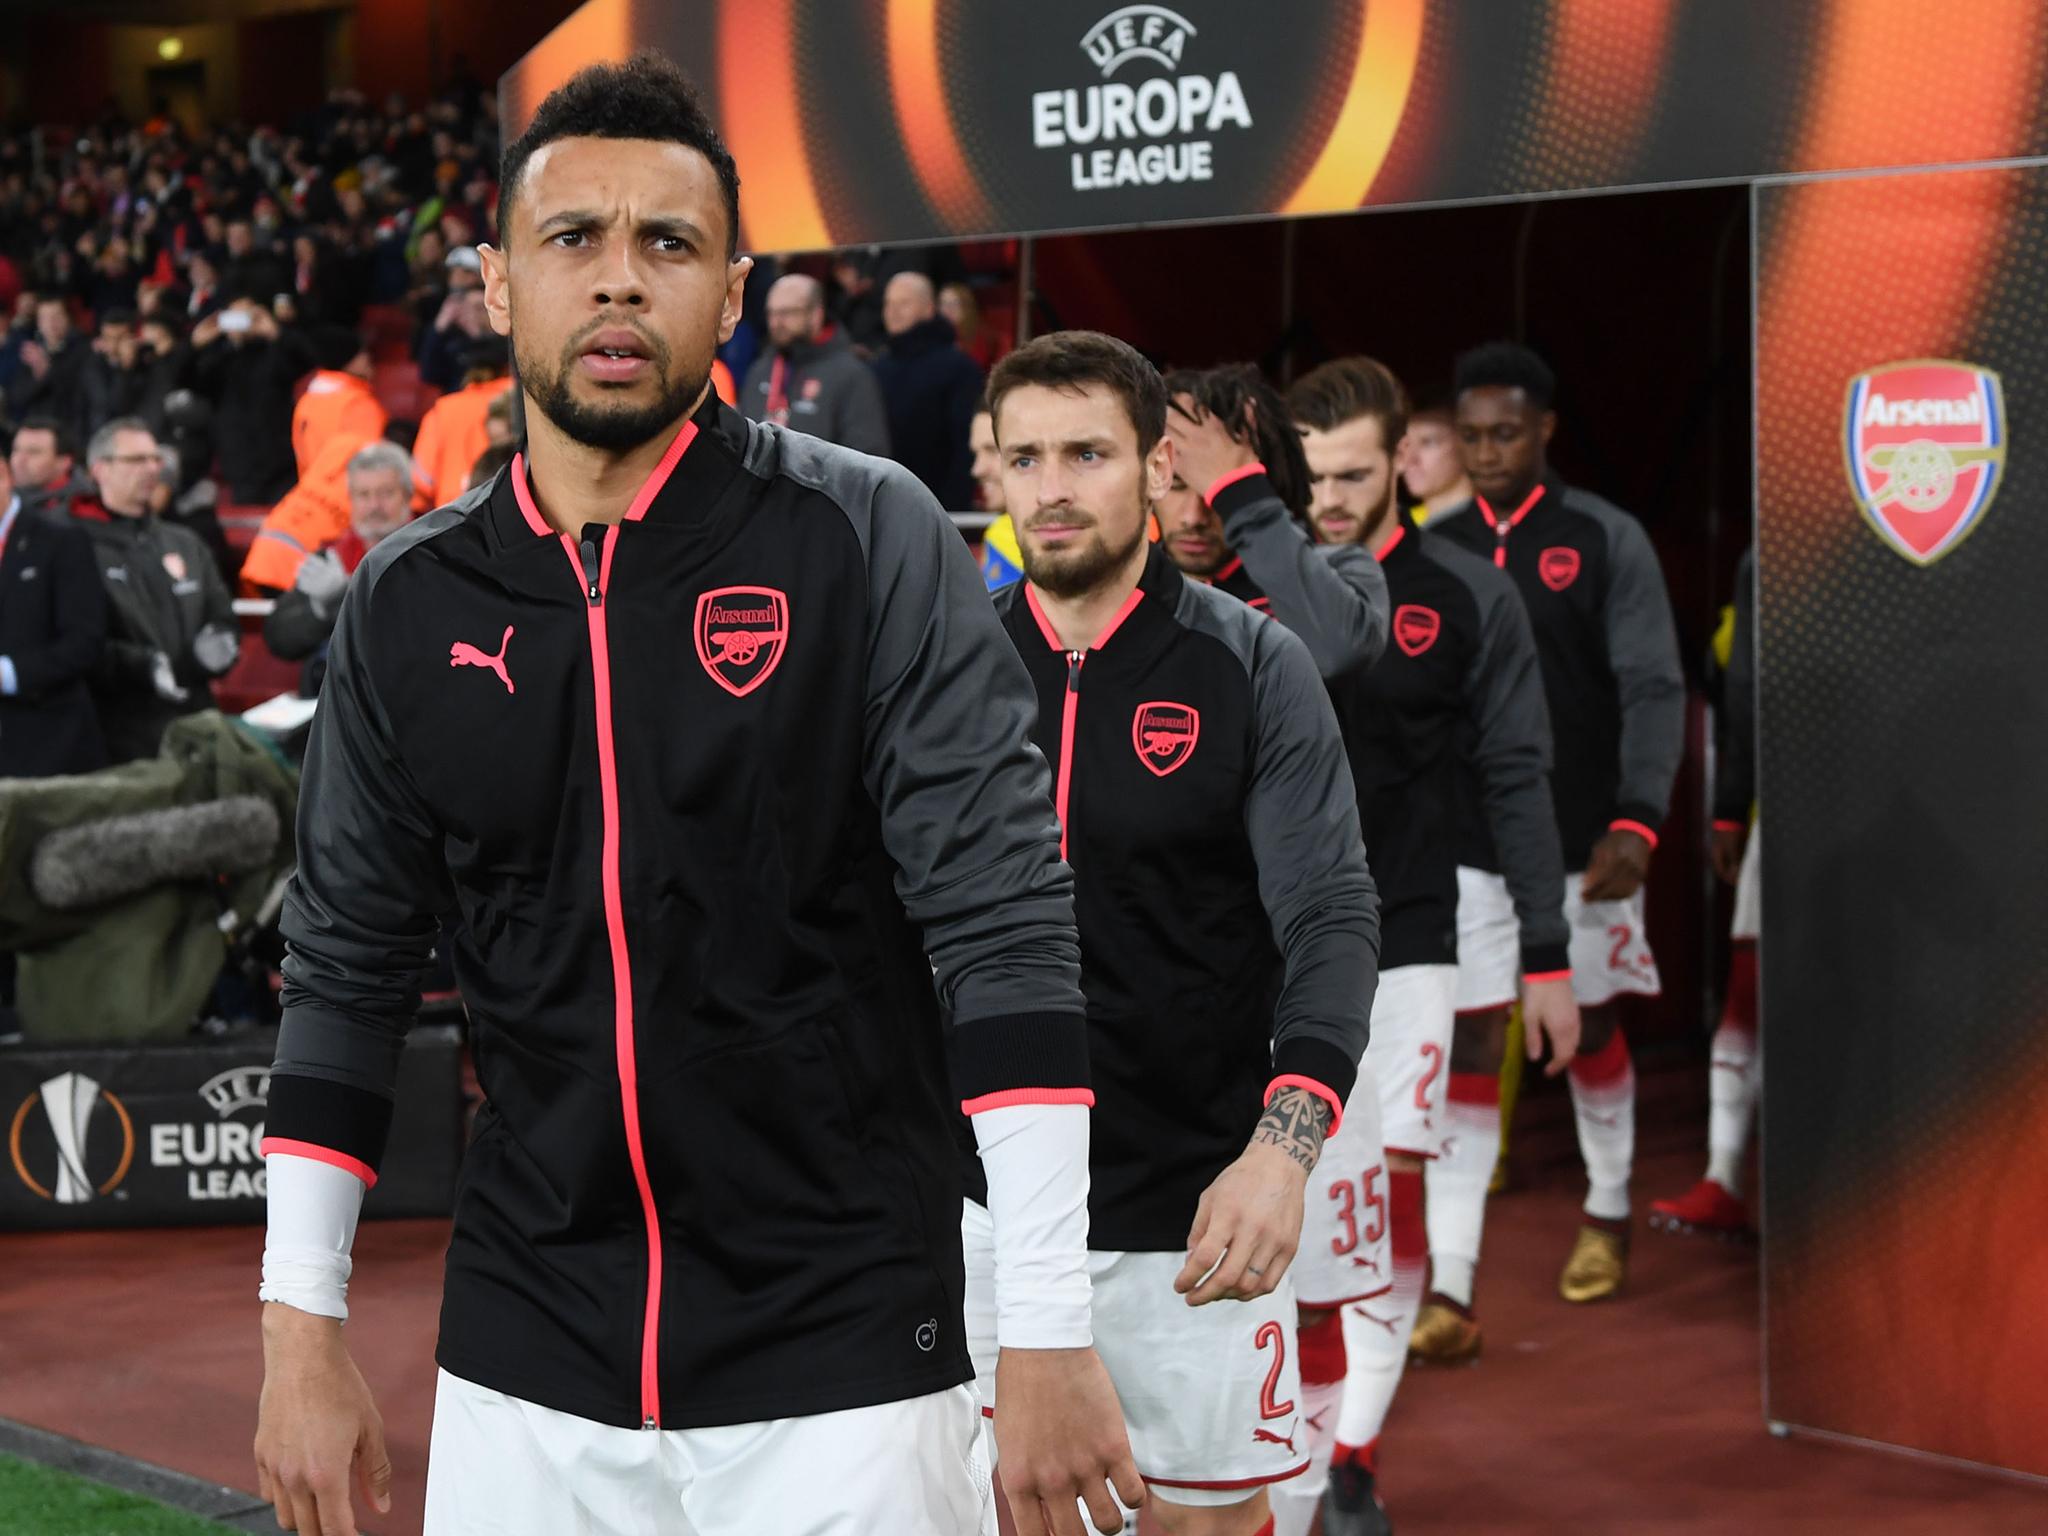 Francis Coquelin could leave Arsenal this month with Valencia, West Ham and Crystal Palace